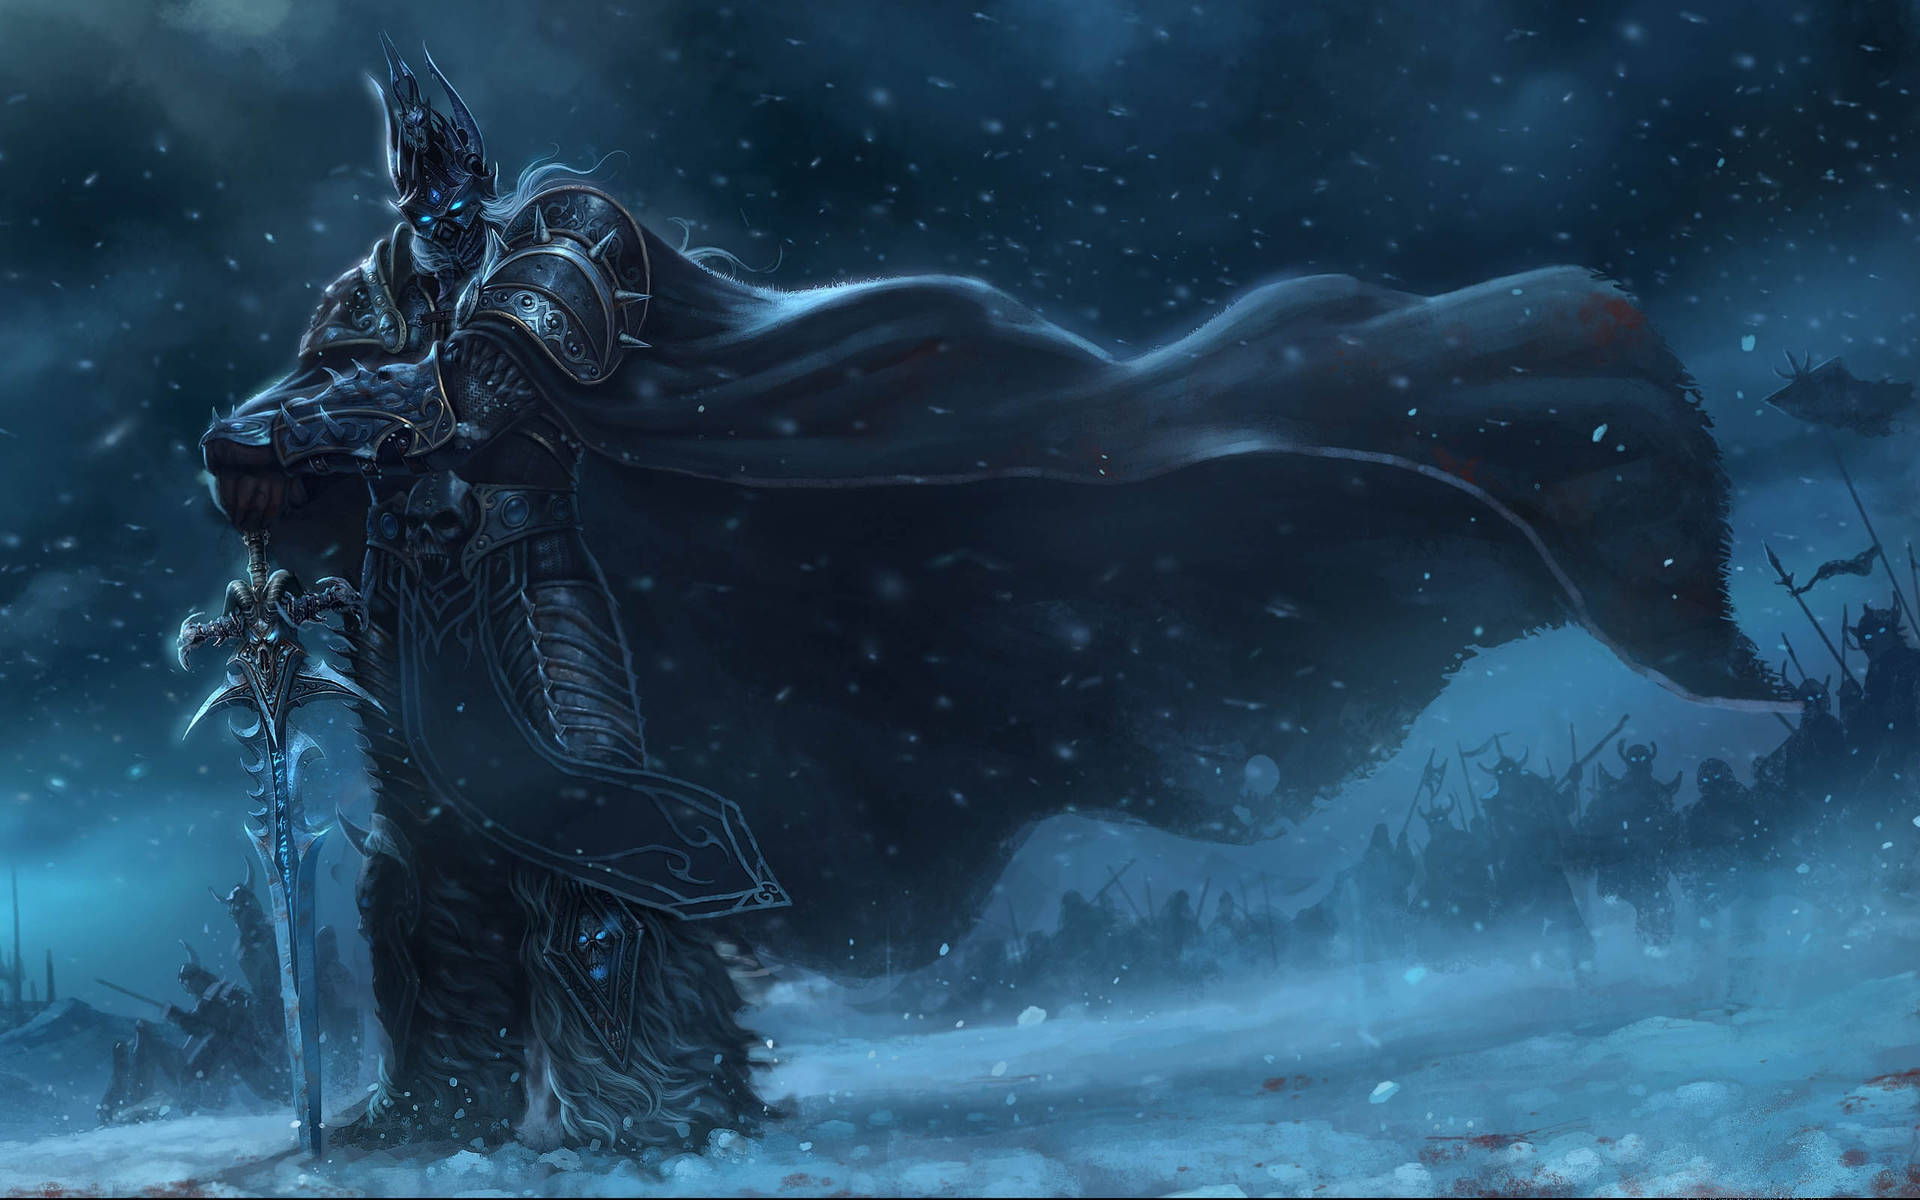 Wrath Of The Lich King Poster